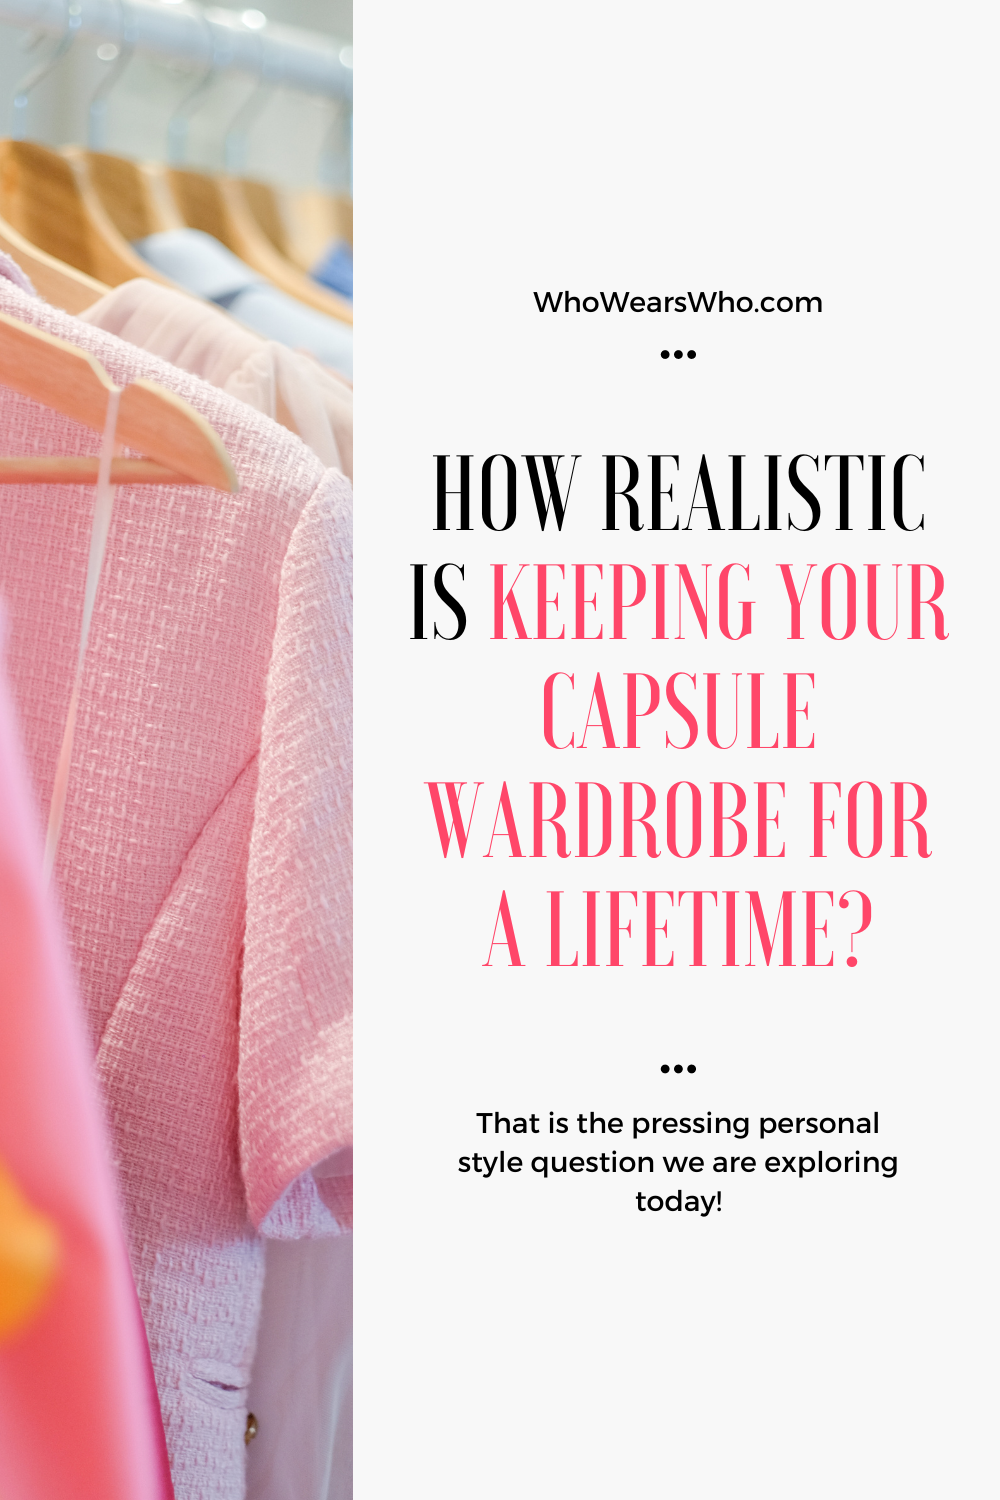 How realistic is keeping your capsule wardrobe for a lifetime